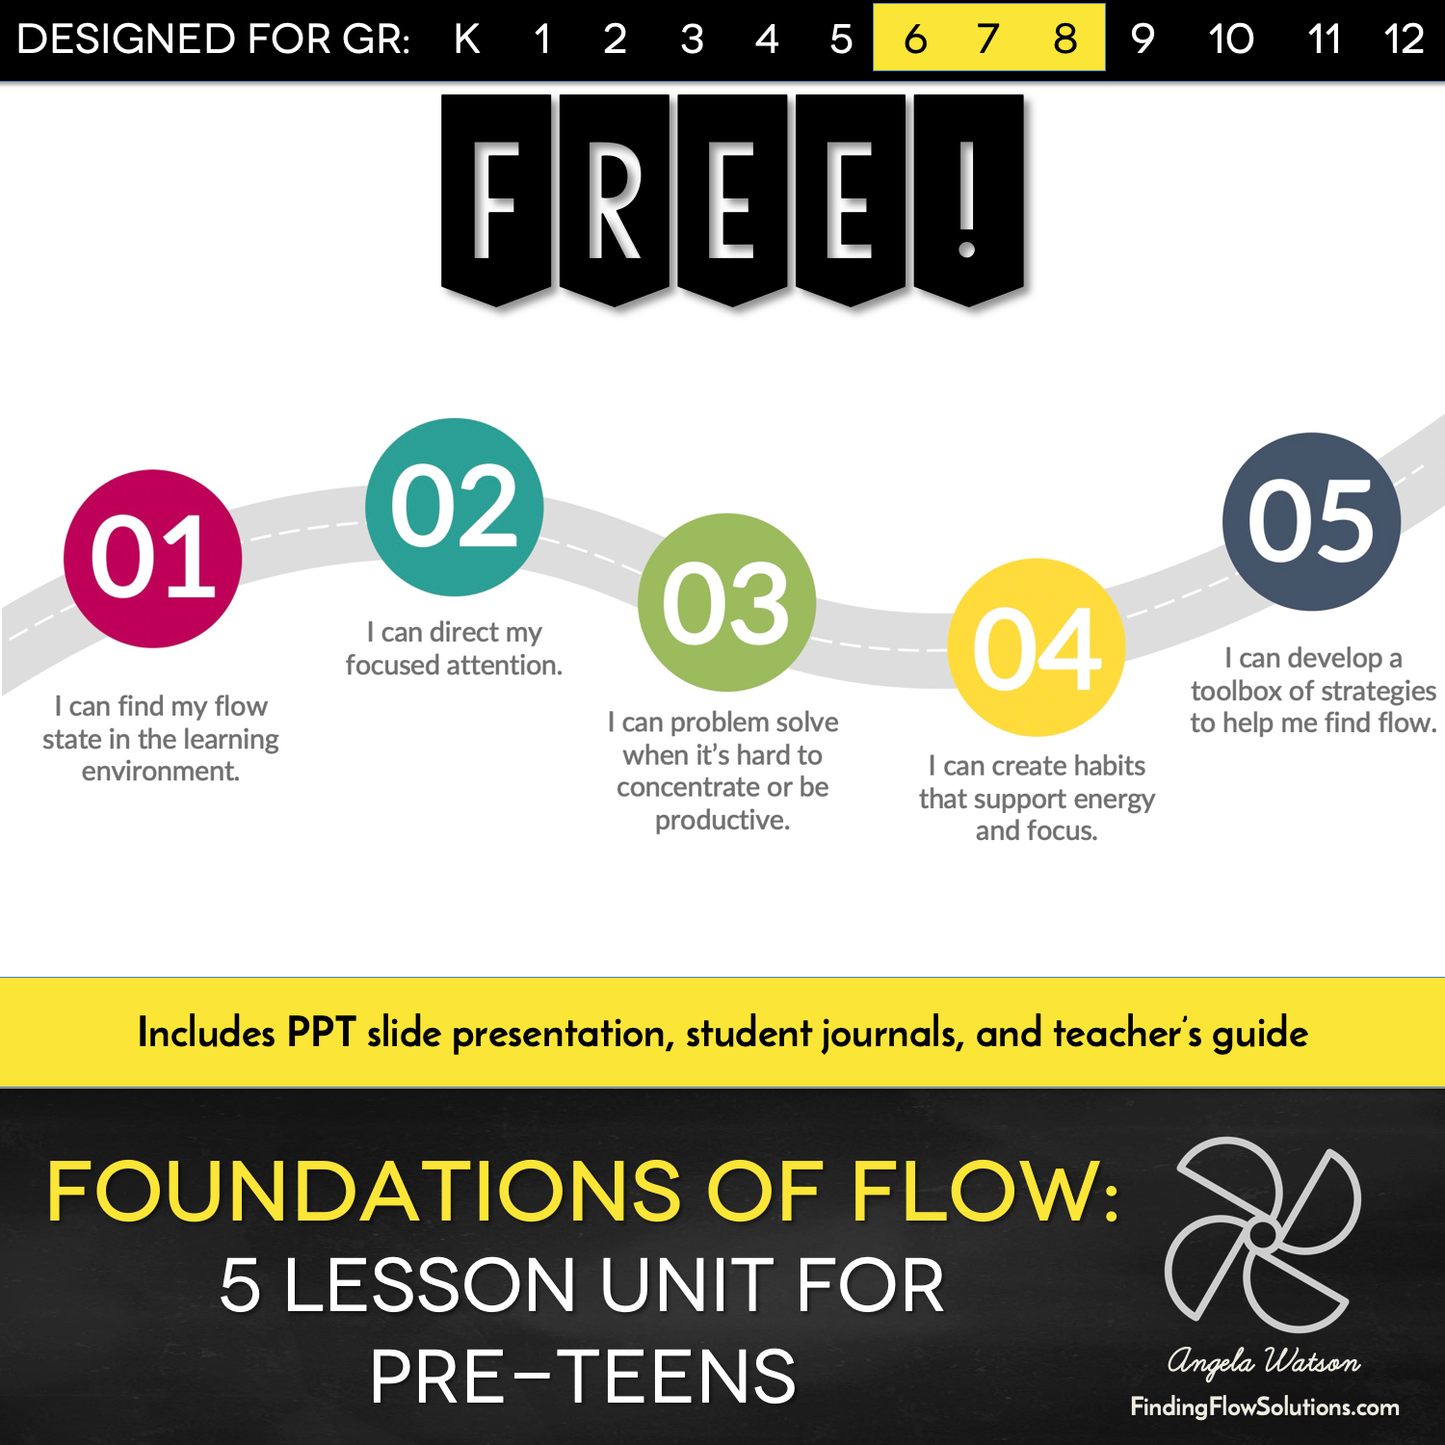 Discounted Bundle: All 6 Units of Middle School Finding Flow Solutions